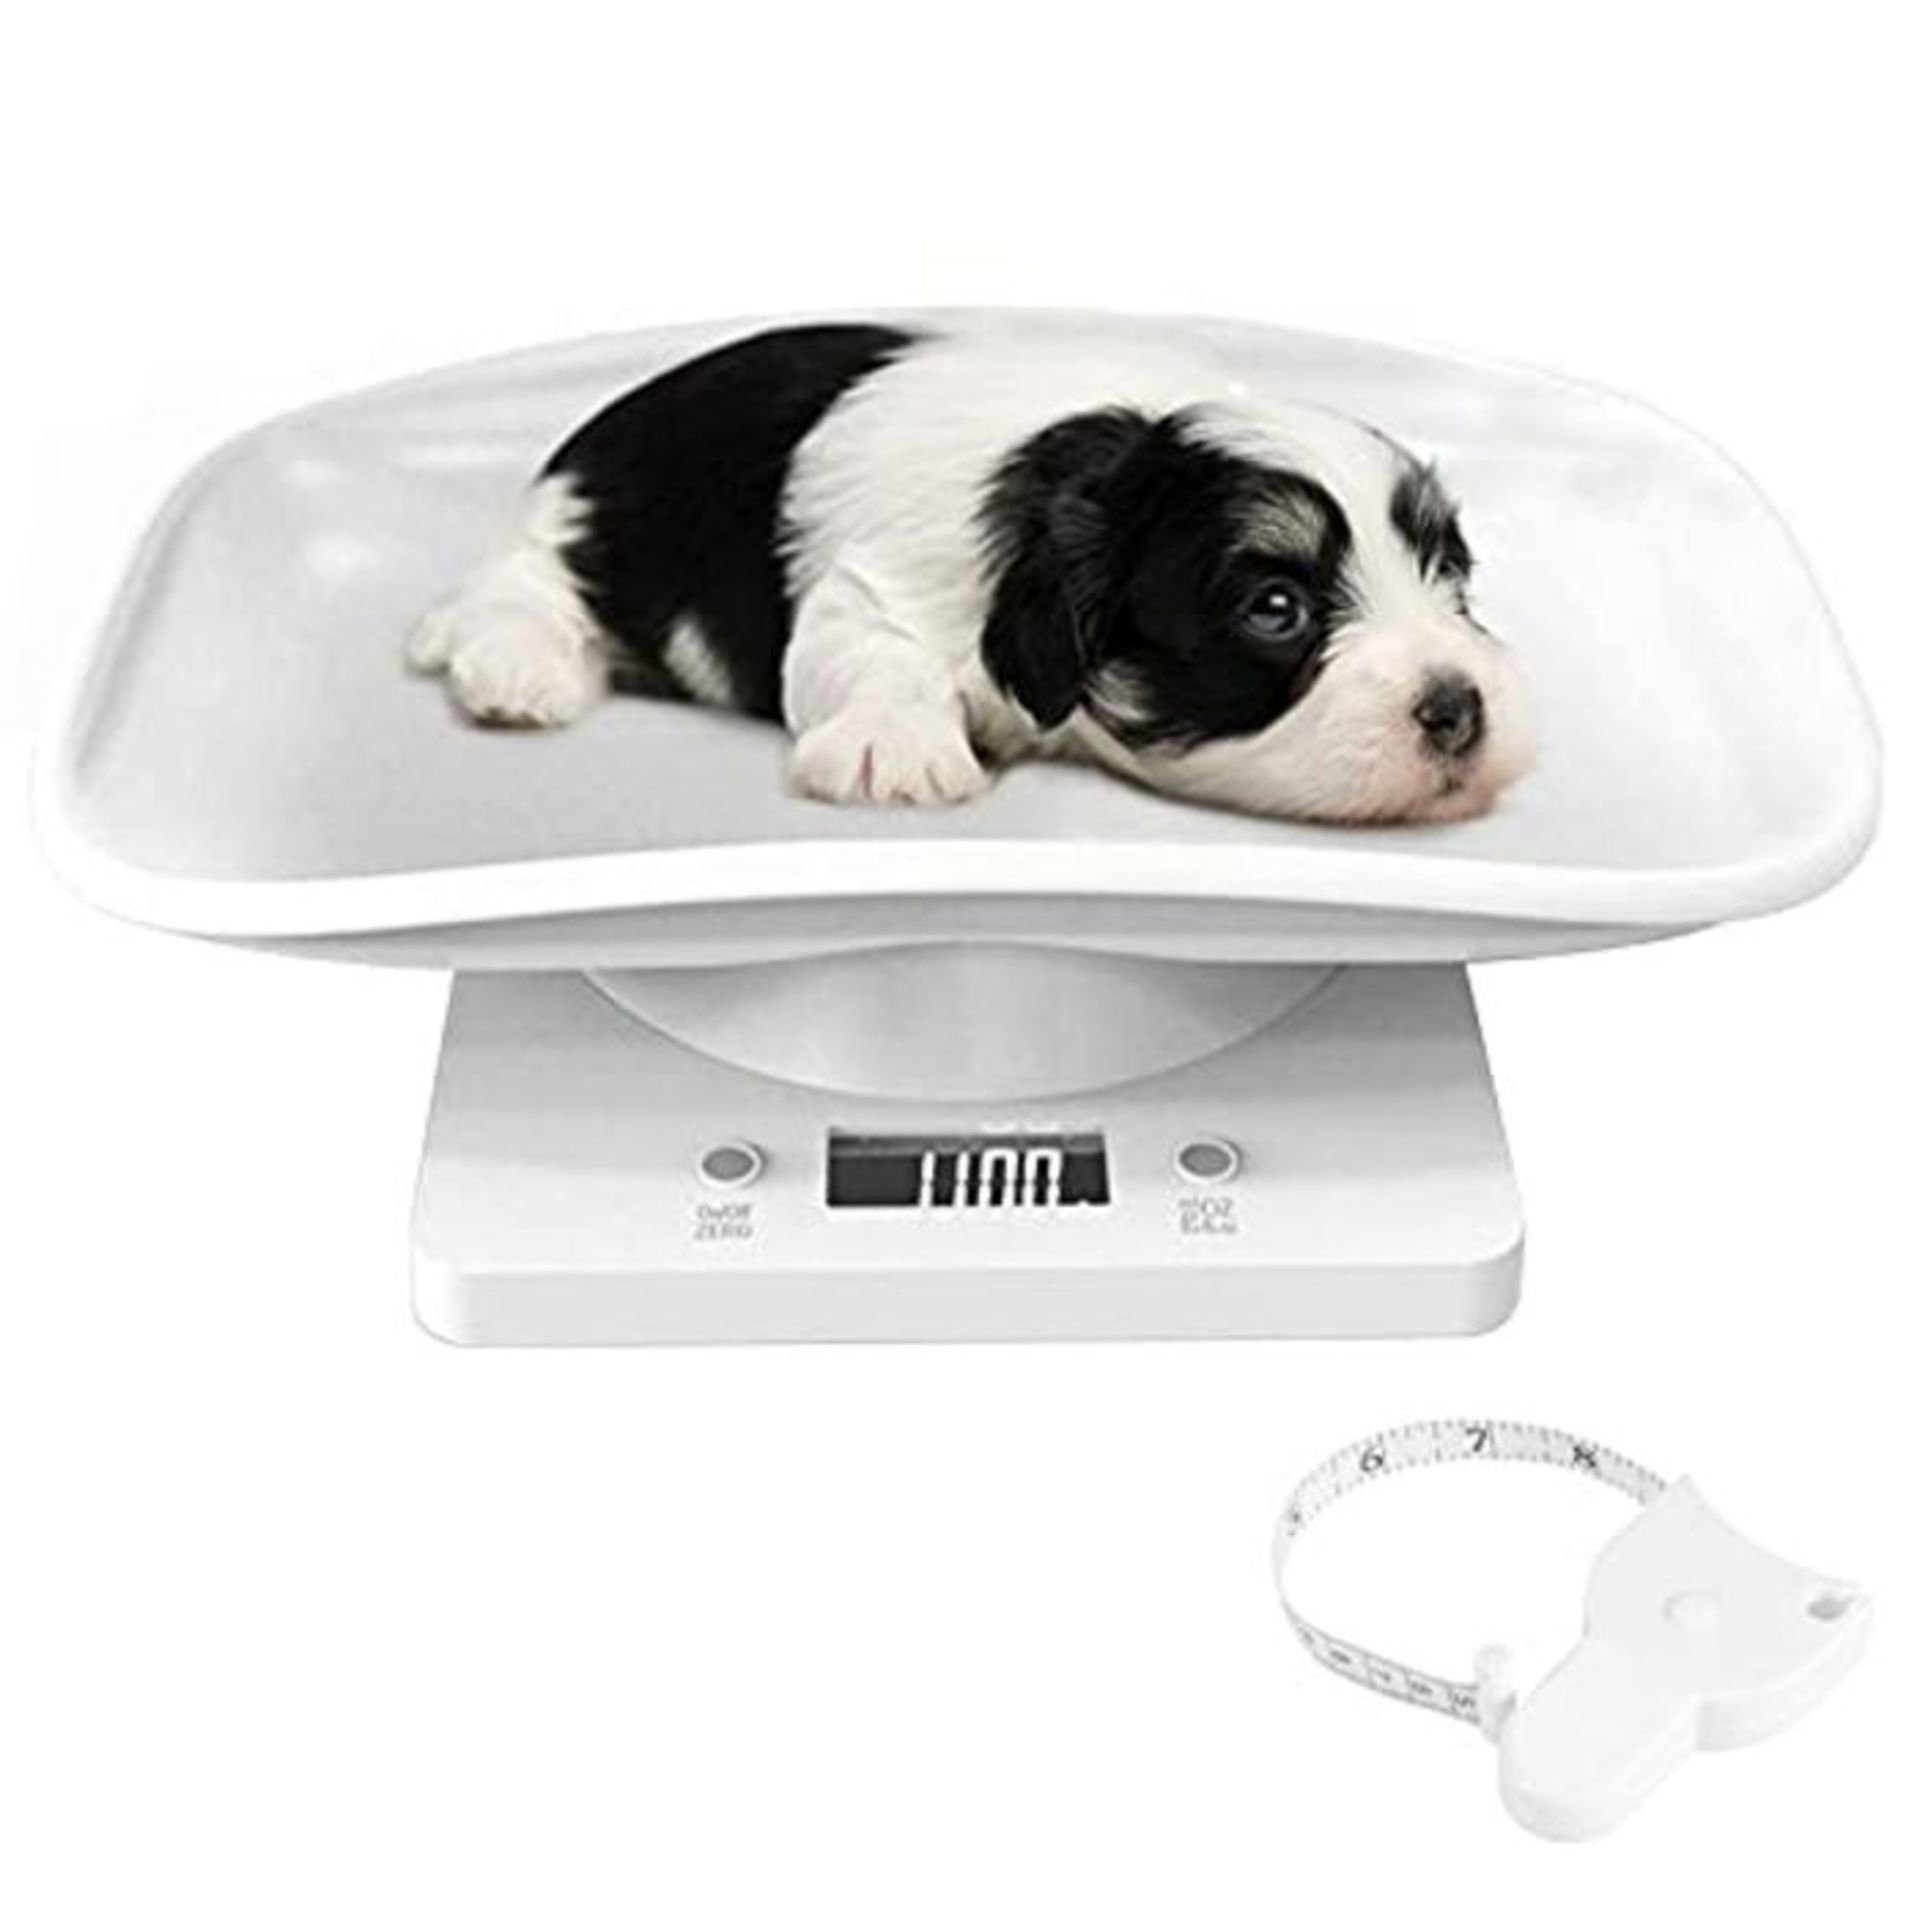 Pet Baby Scales Weight Pet Baby Weighing Scale, Pet Scales, Dog Scales, Puppy Scales,